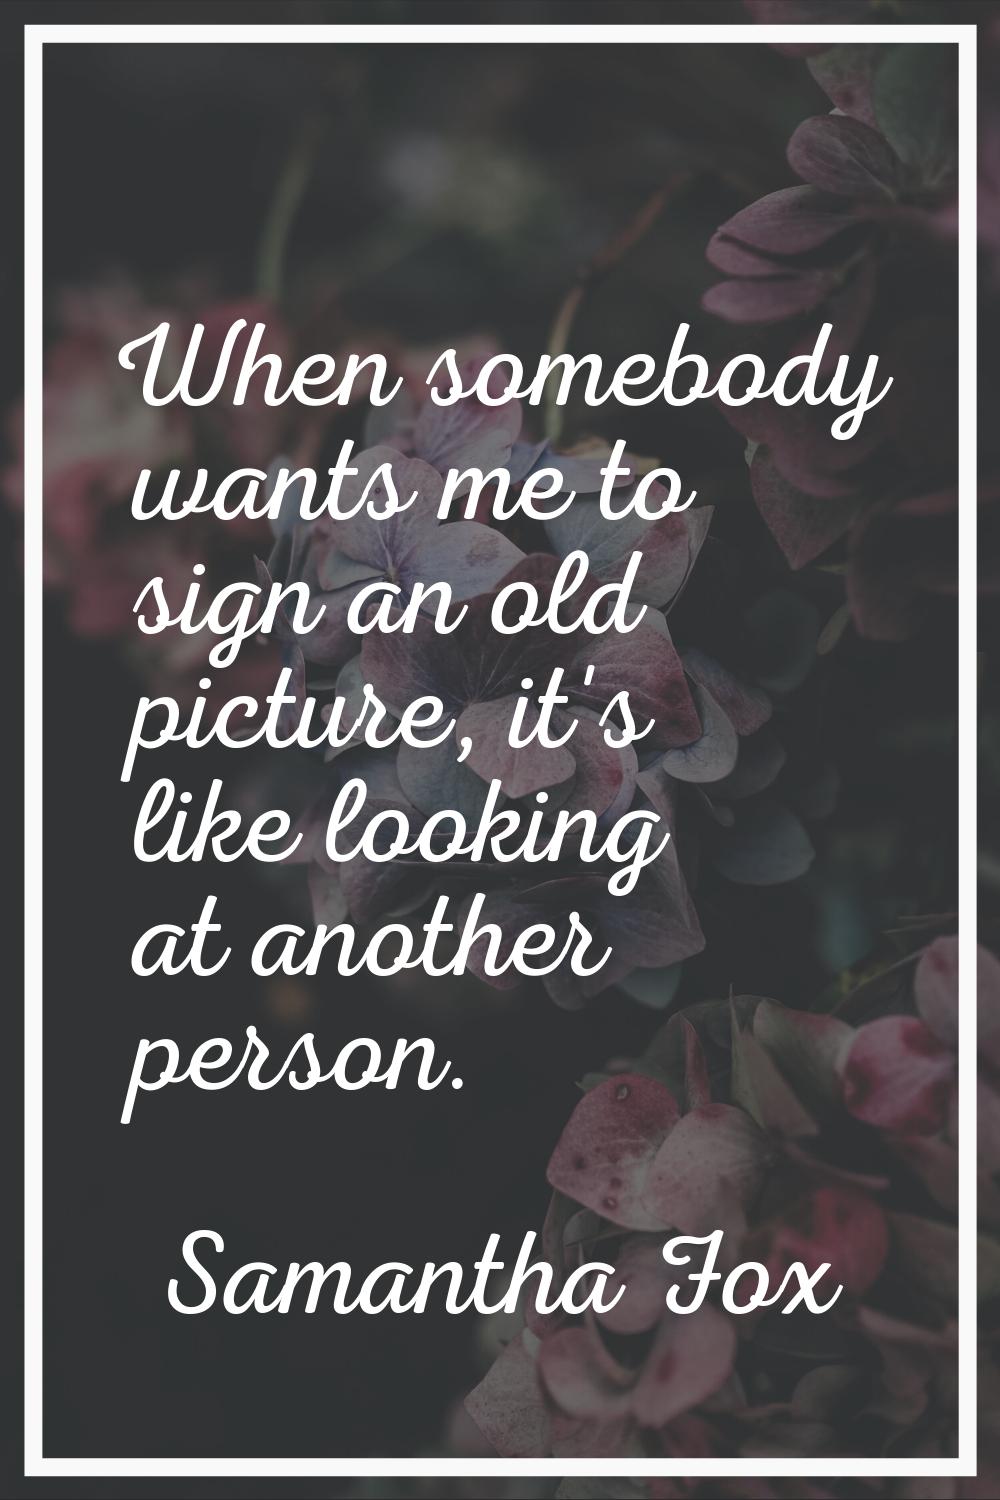 When somebody wants me to sign an old picture, it's like looking at another person.